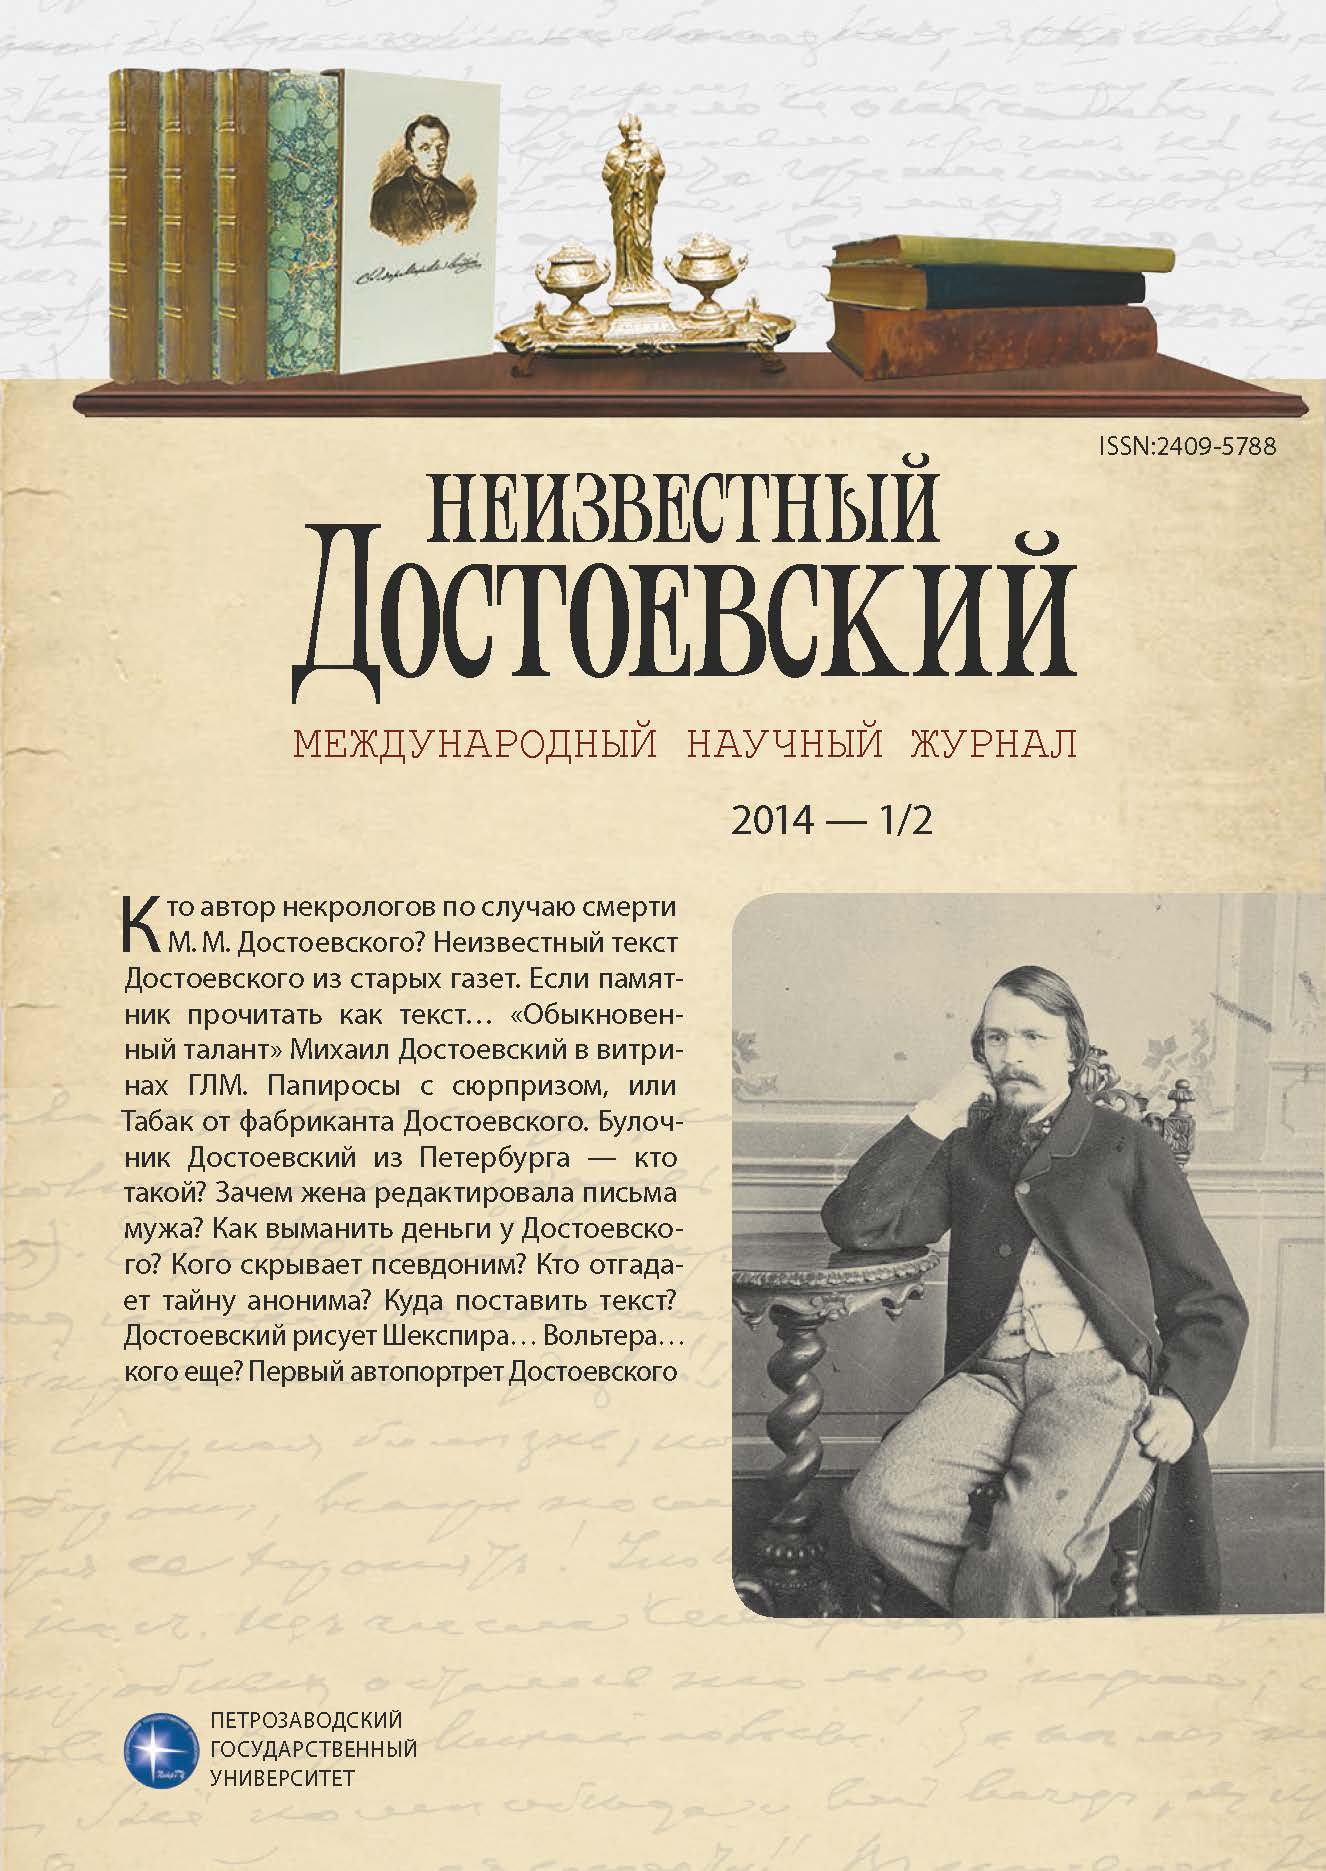 Portrait Sketches of Dostoevsky: New Attributions Cover Image